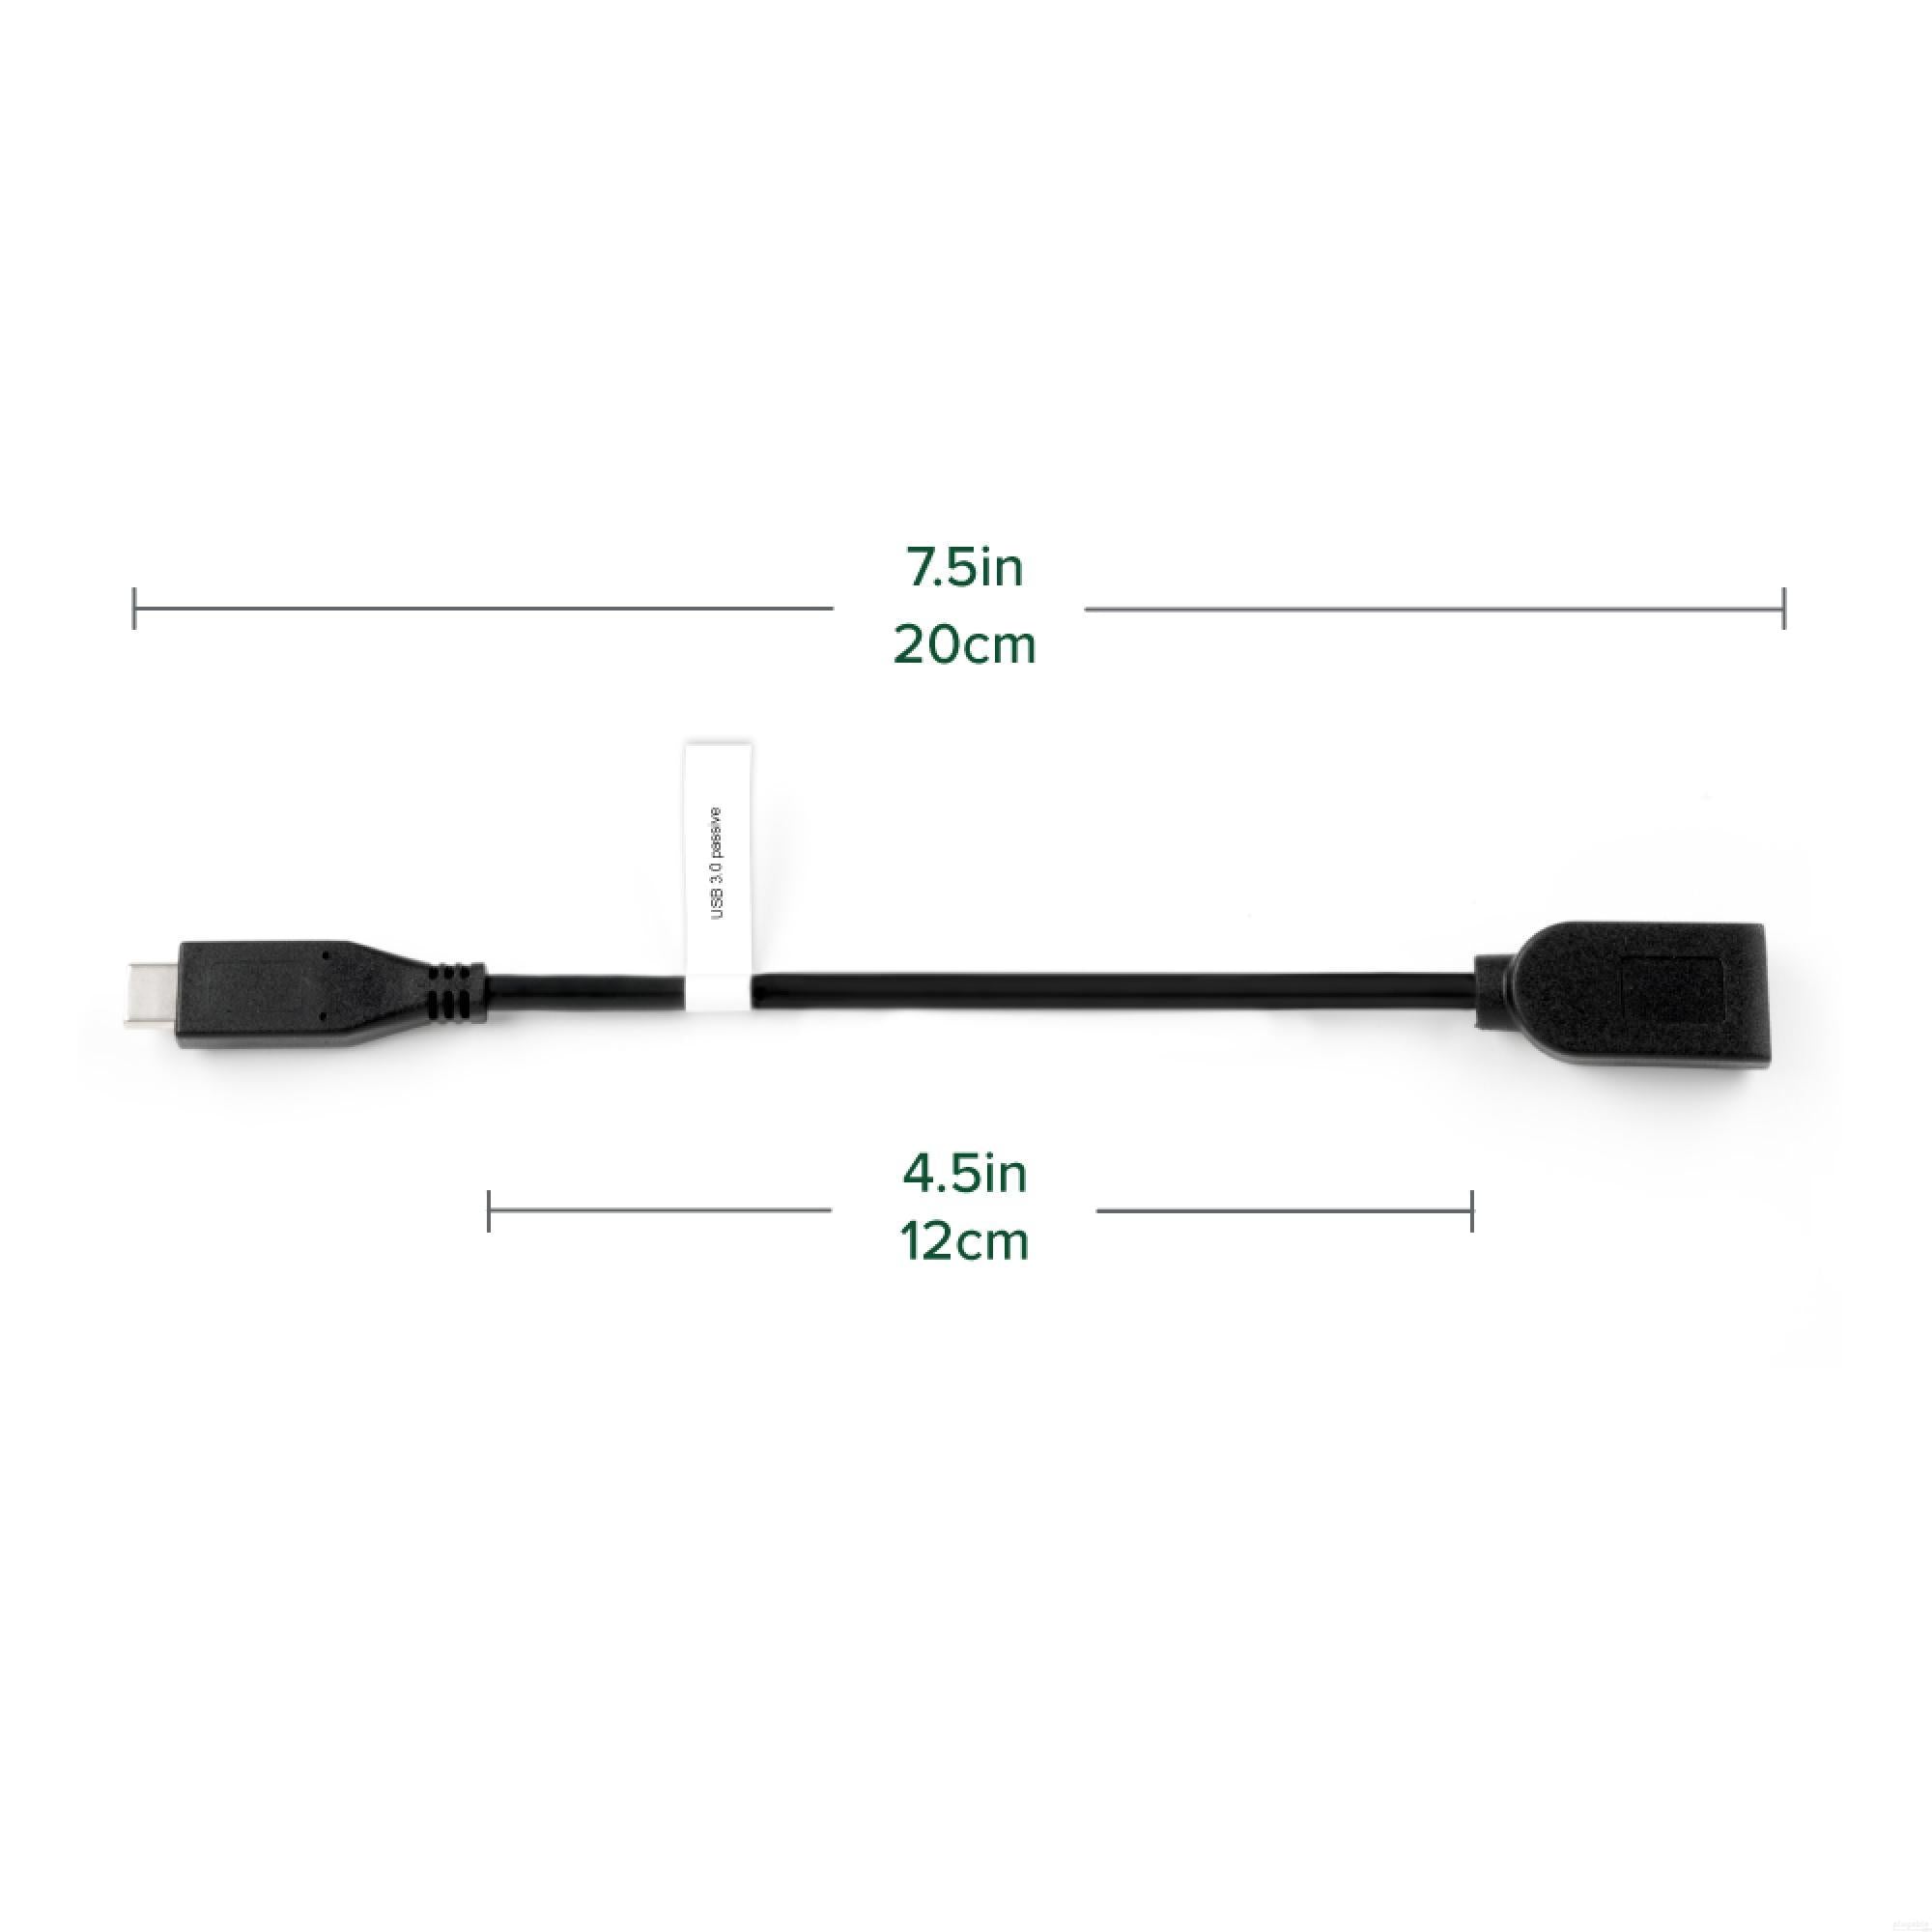  Inseego (3.3-Foot) USB to USB-C (Type C) Charge & Sync Cable -  Black INSGUSB3.0 : Electronics